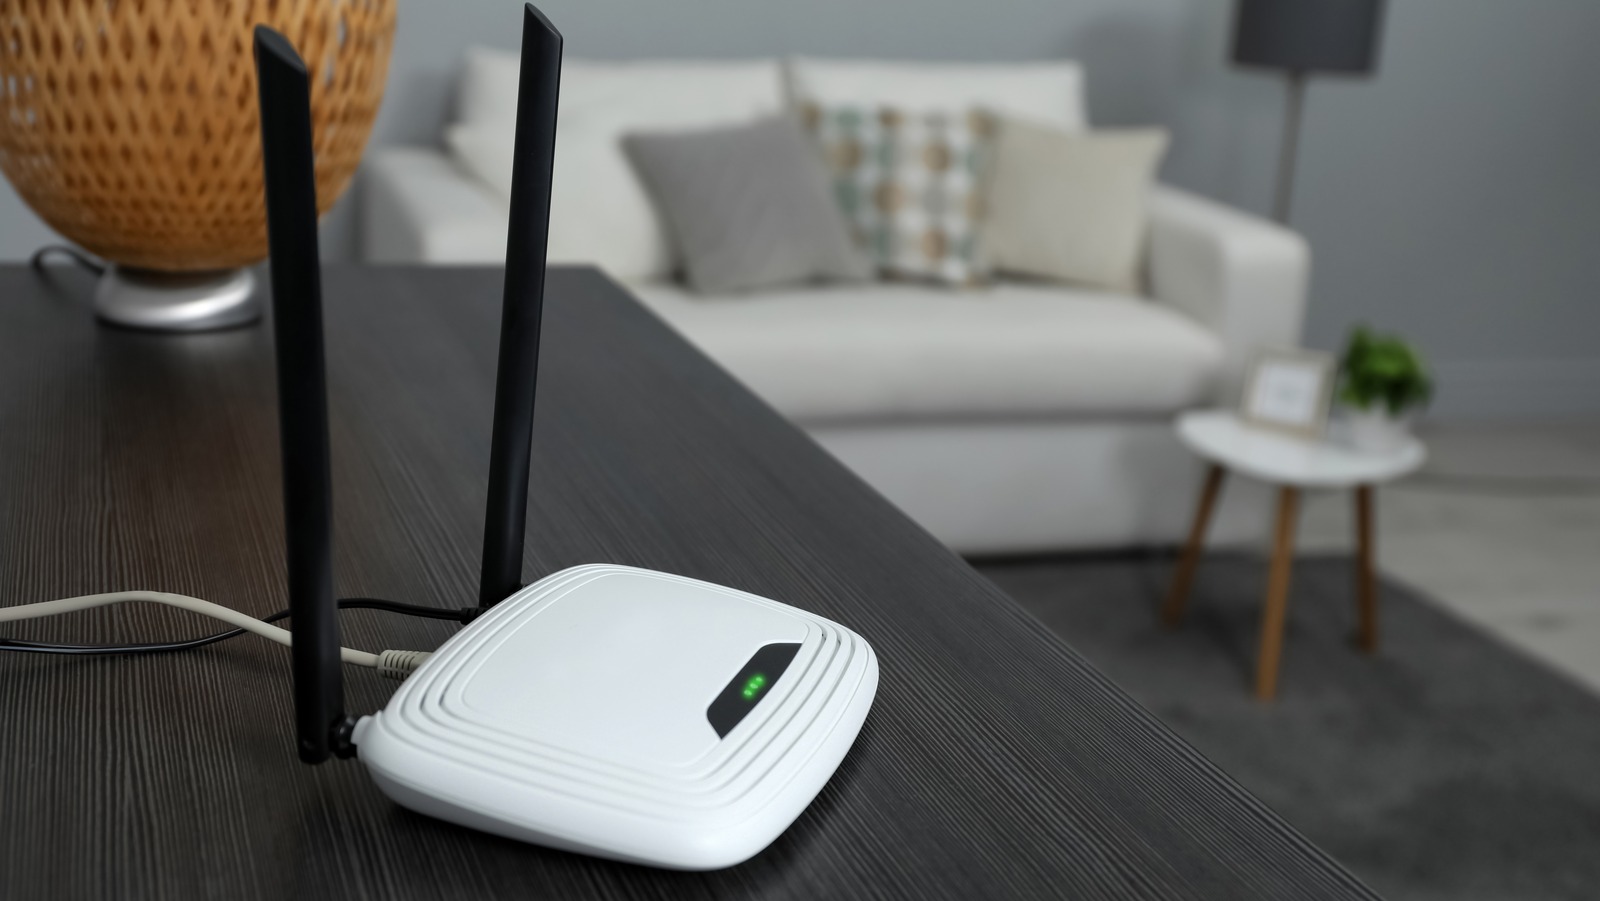 How To Hide A Wi-Fi Router In Living Room